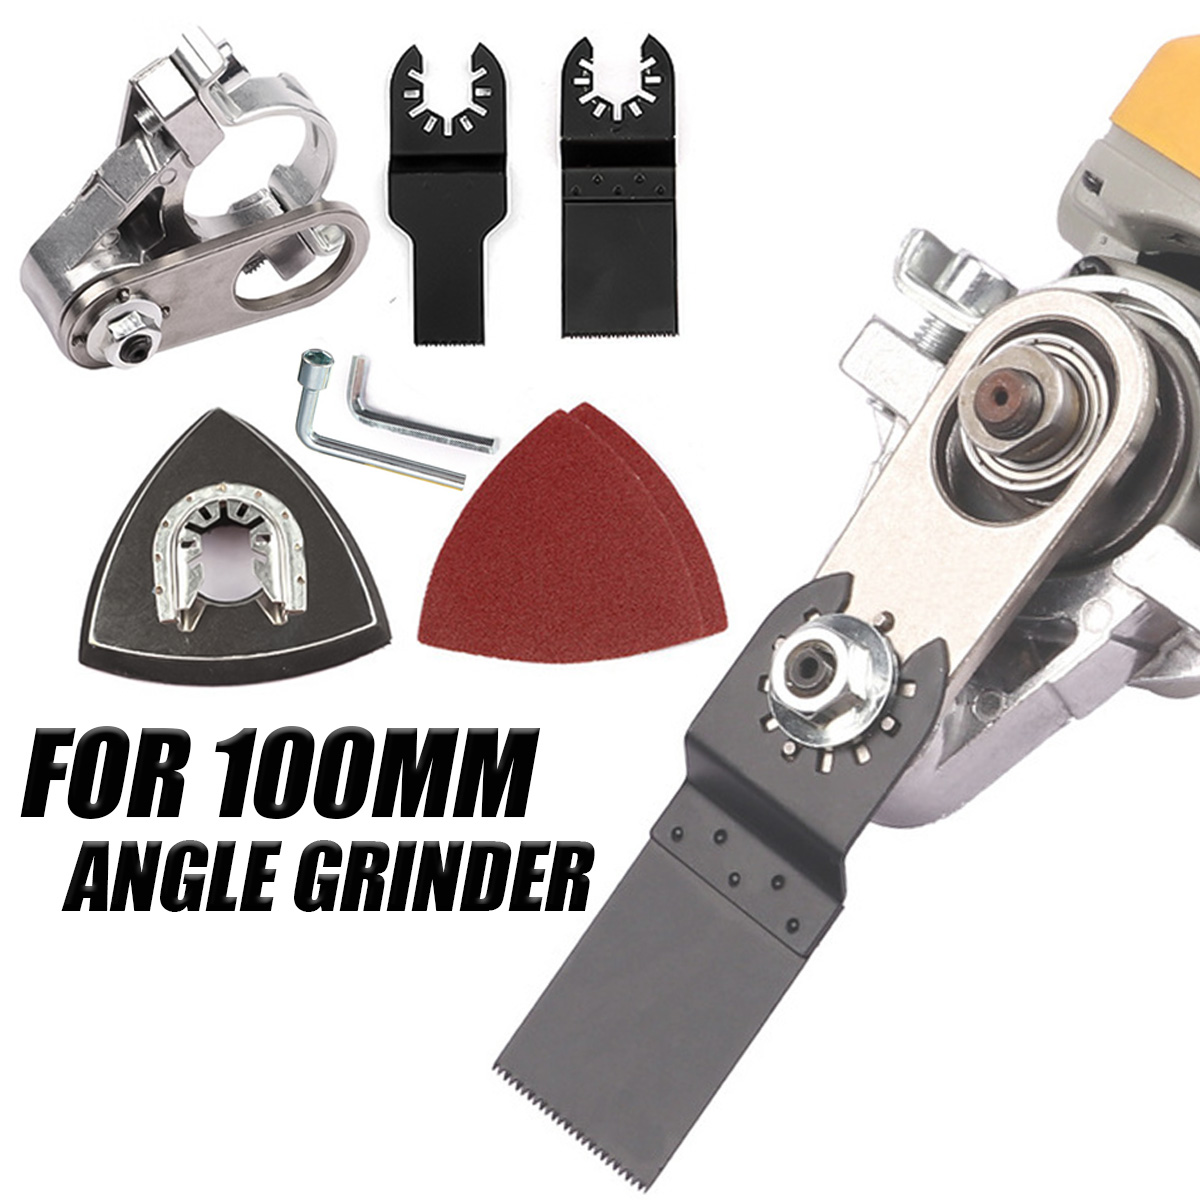 Cordless-Oscillating-Multi-Tool-Angle-Grinder-Conversion-Tool-Head-For-100mm-Angle-Grinder-1897823-1